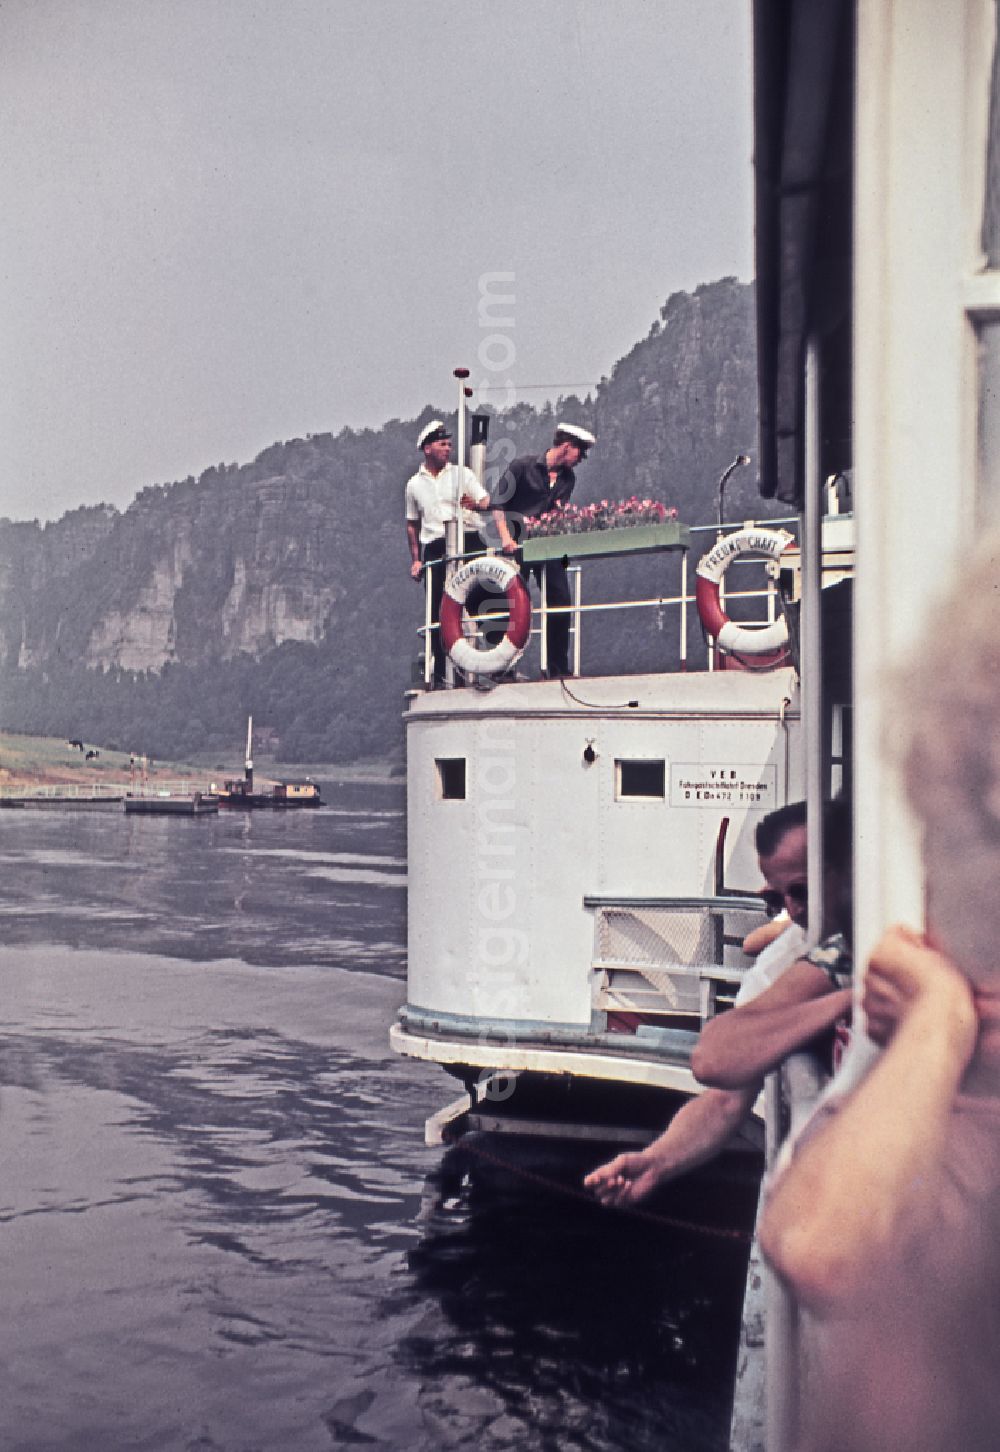 GDR photo archive: Bad Schandau - Passenger ship for passenger transport - paddle steamer sailing on the Elbe in Bad Schandau, Saxony in the territory of the former GDR, German Democratic Republic